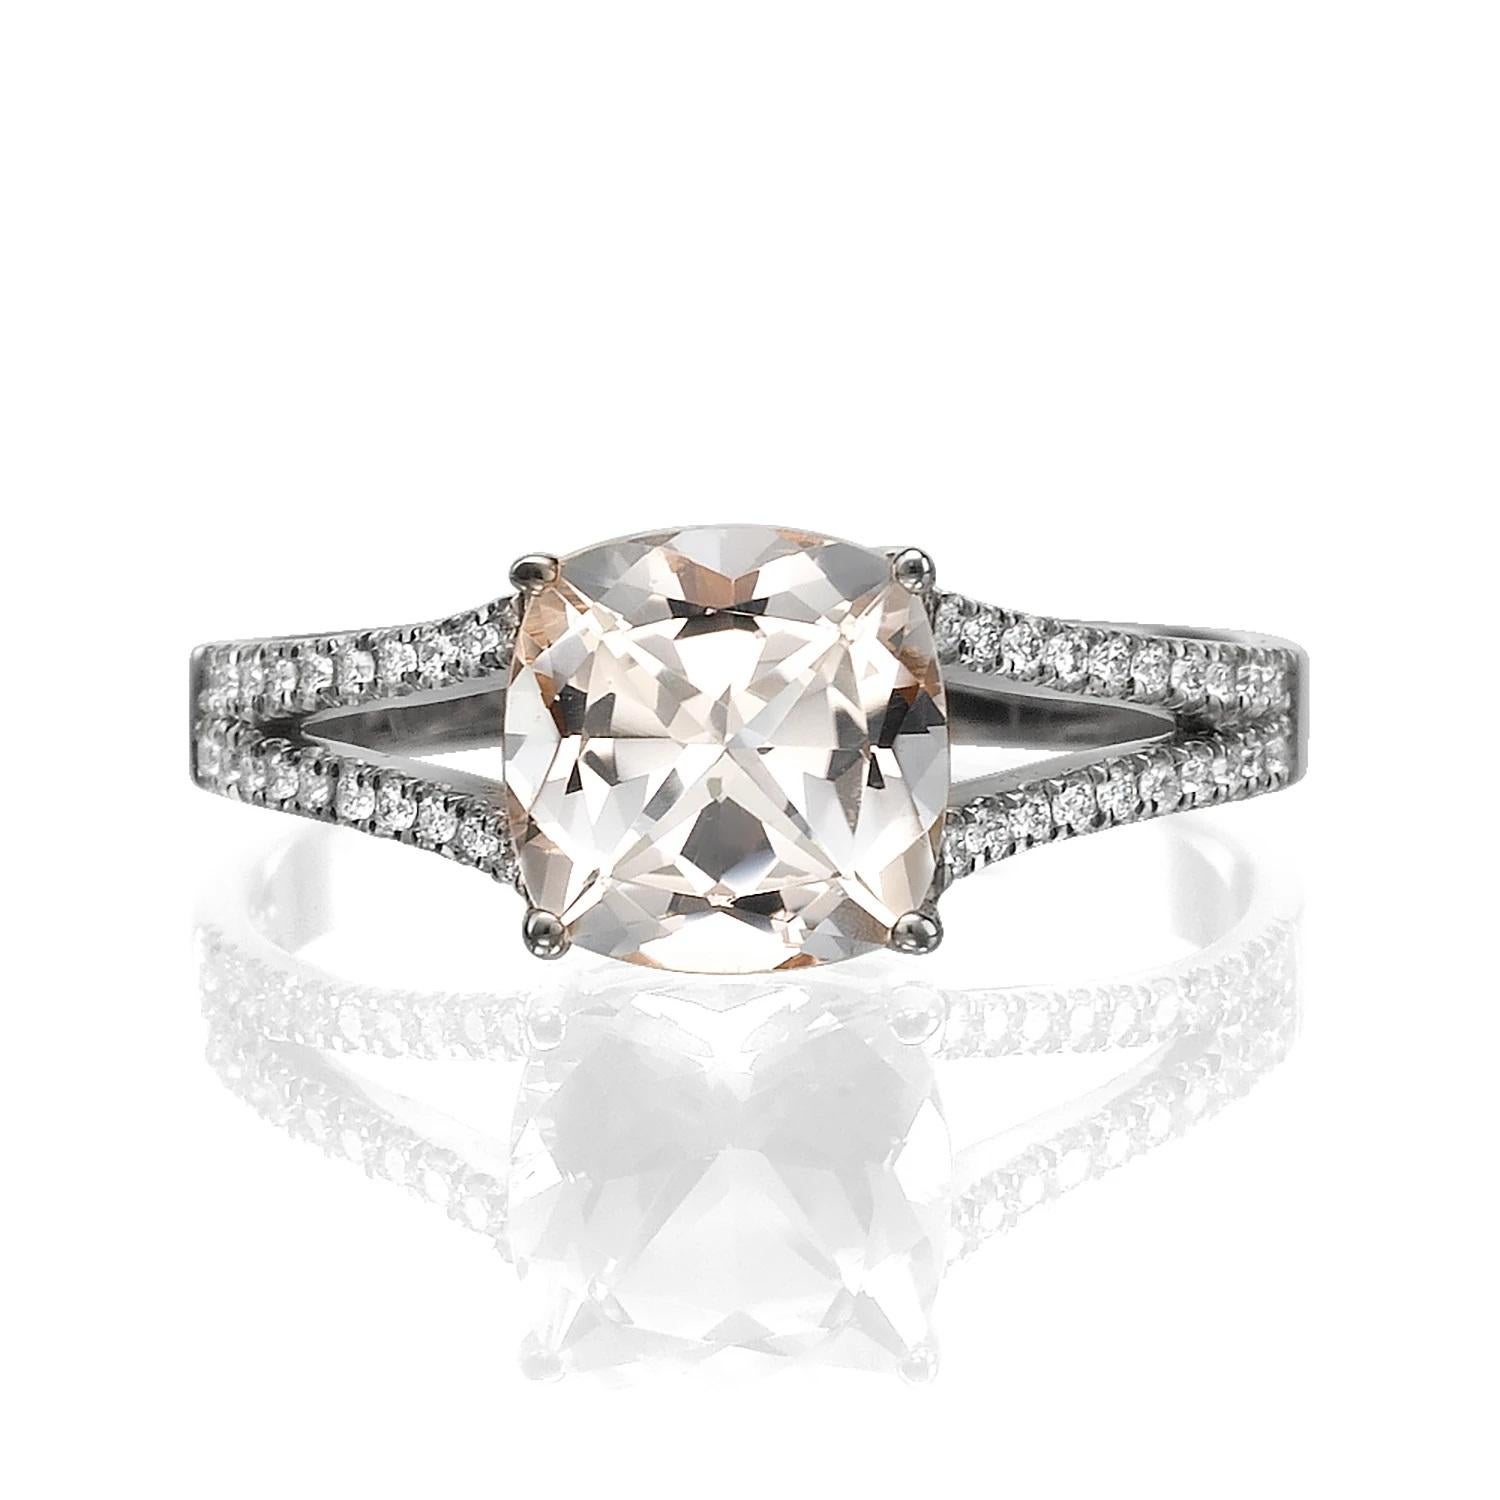 Unique split shank setting ring with beautiful morganite center stone and diamond side stones. Center stone is of 1 carat, natural, cushion shape, peach/pink color morganite and it is surrounded with 26 natural diamonds.
 
Main Stone Name: